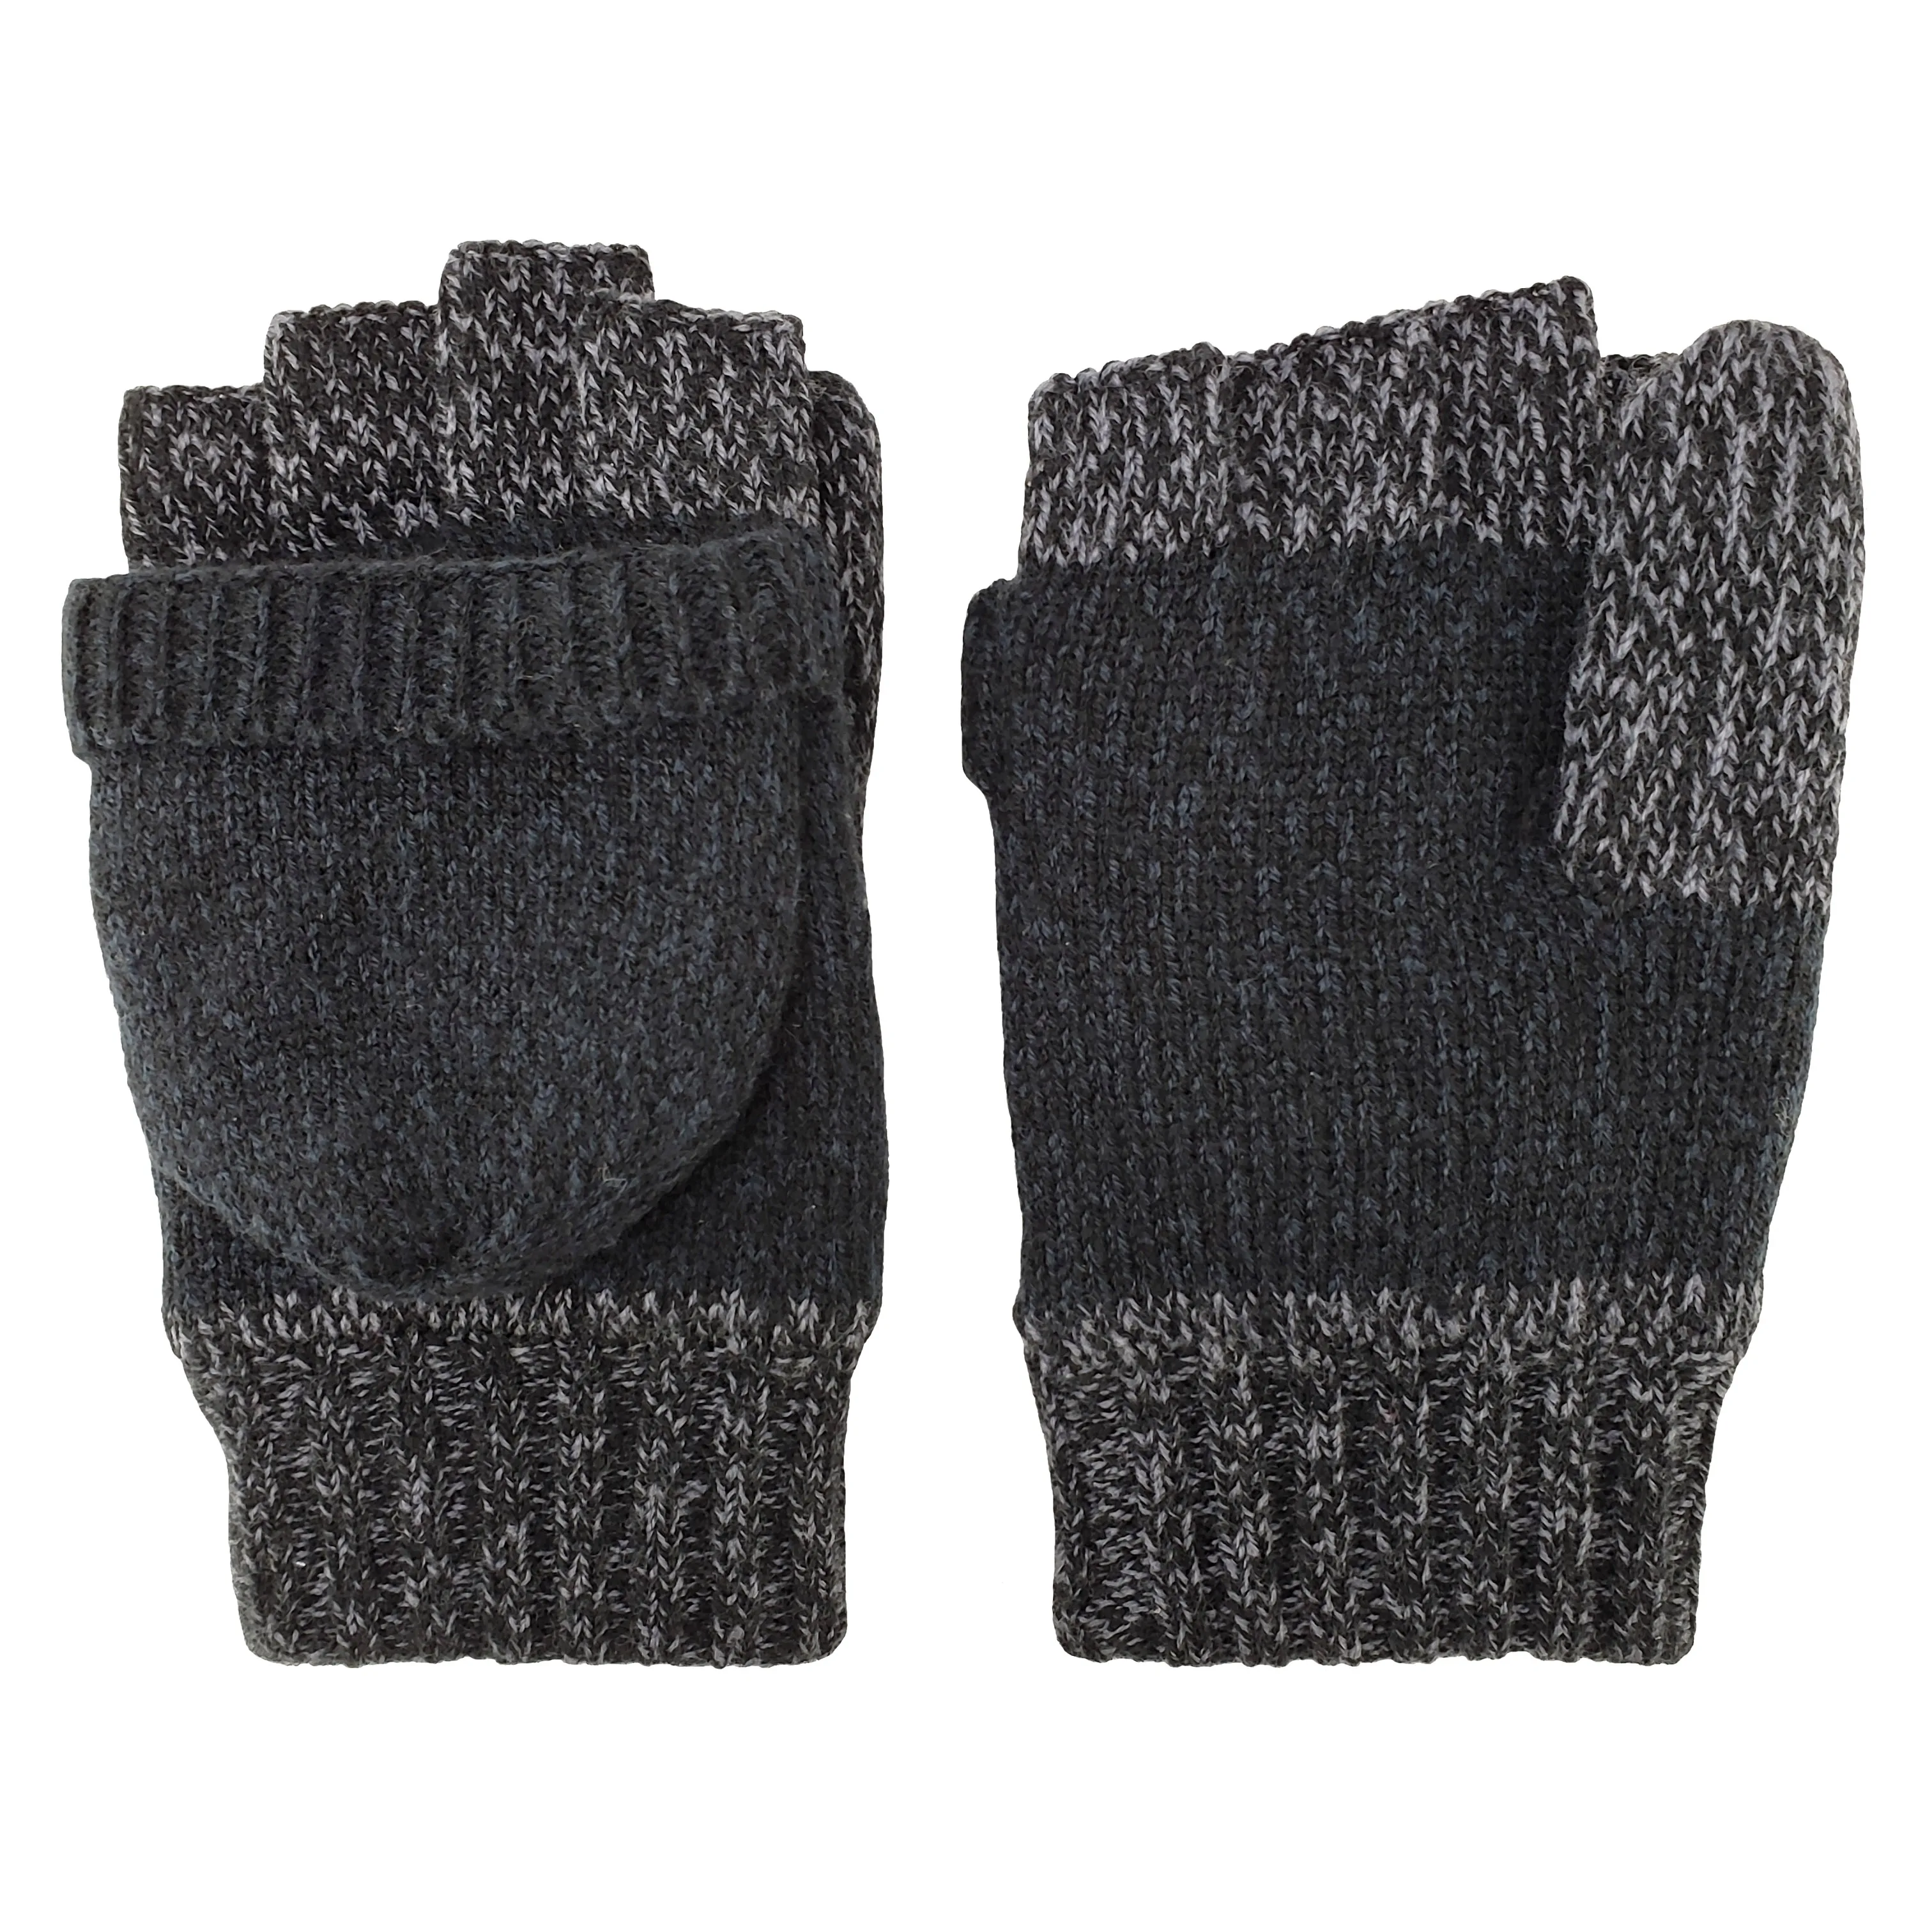 Bruceriver Mens Knit Convertible Fingerless Driving Gloves with Mitten Cover 